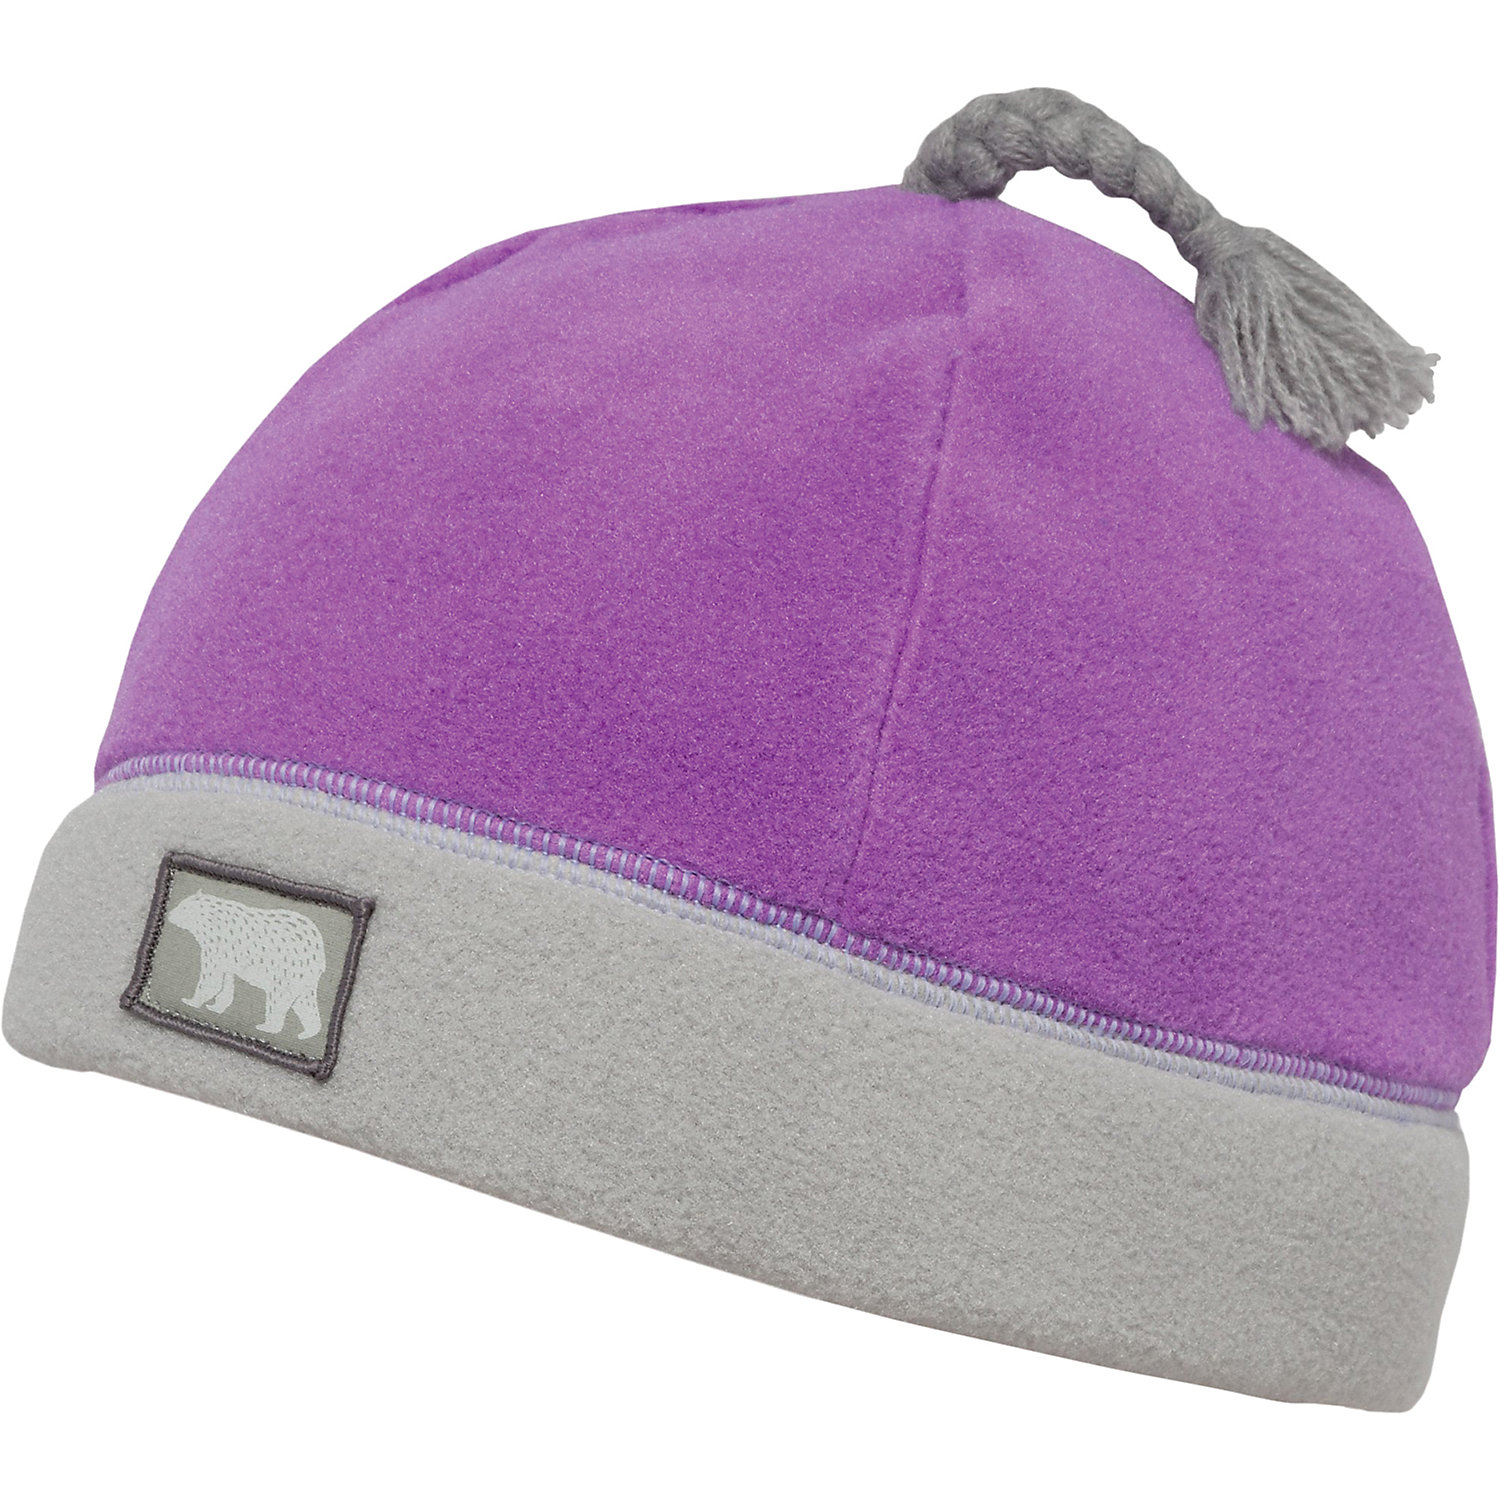 Sunday Afternoons Infant Cozy Critter Beanie